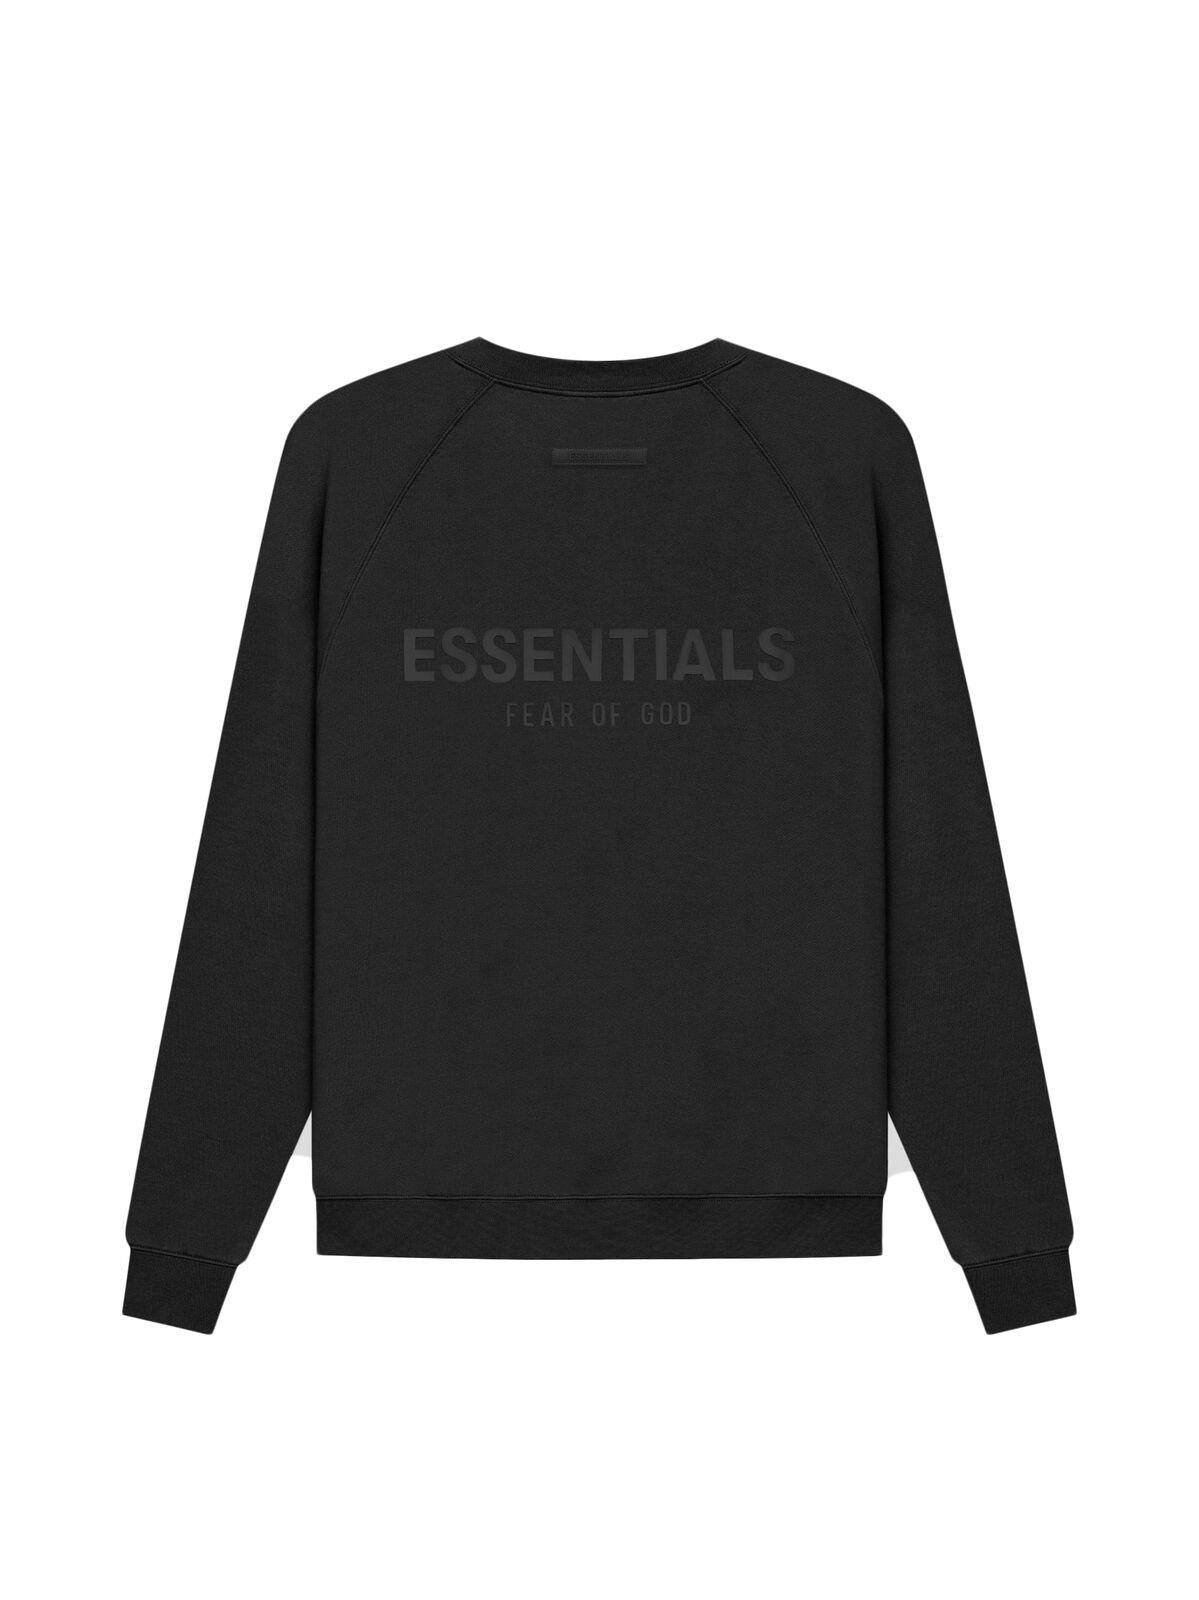 Fear of God Essentials Pullover Chest Logo Crewneck Black Stretch Limo Small